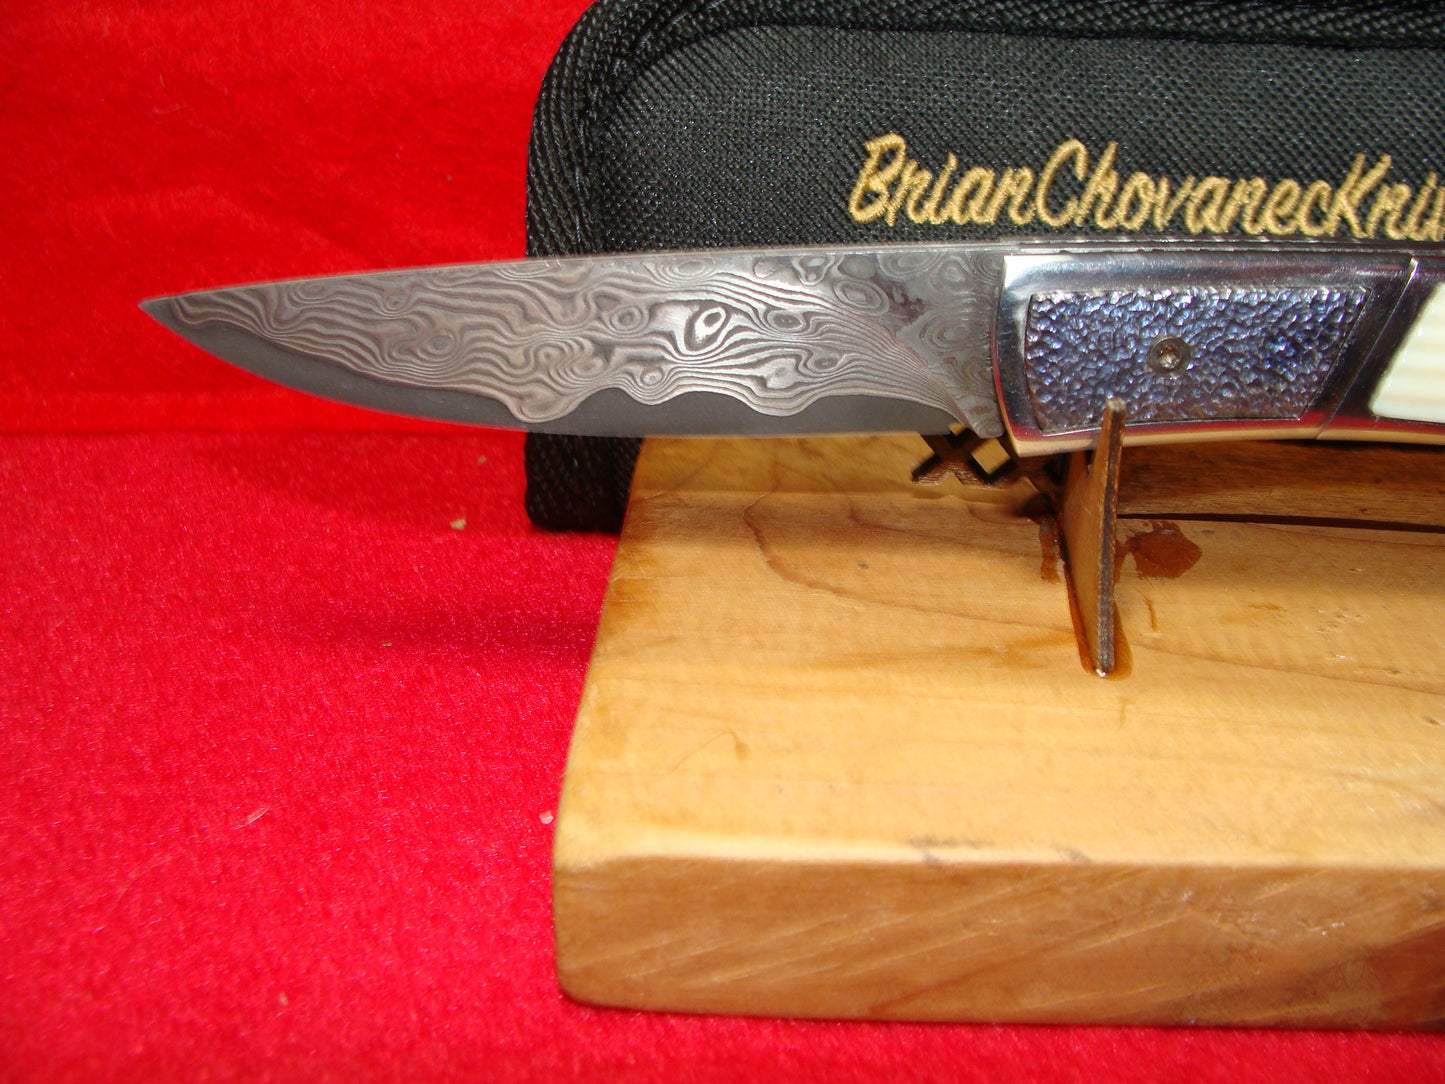 BRIAN CHOVANEC CUSTOM 2023 TORRENT BOLSTER RELEASE CUSTOM AUTOMATIC KNIFE FOSSIL WALRUS IVORY HANDLES